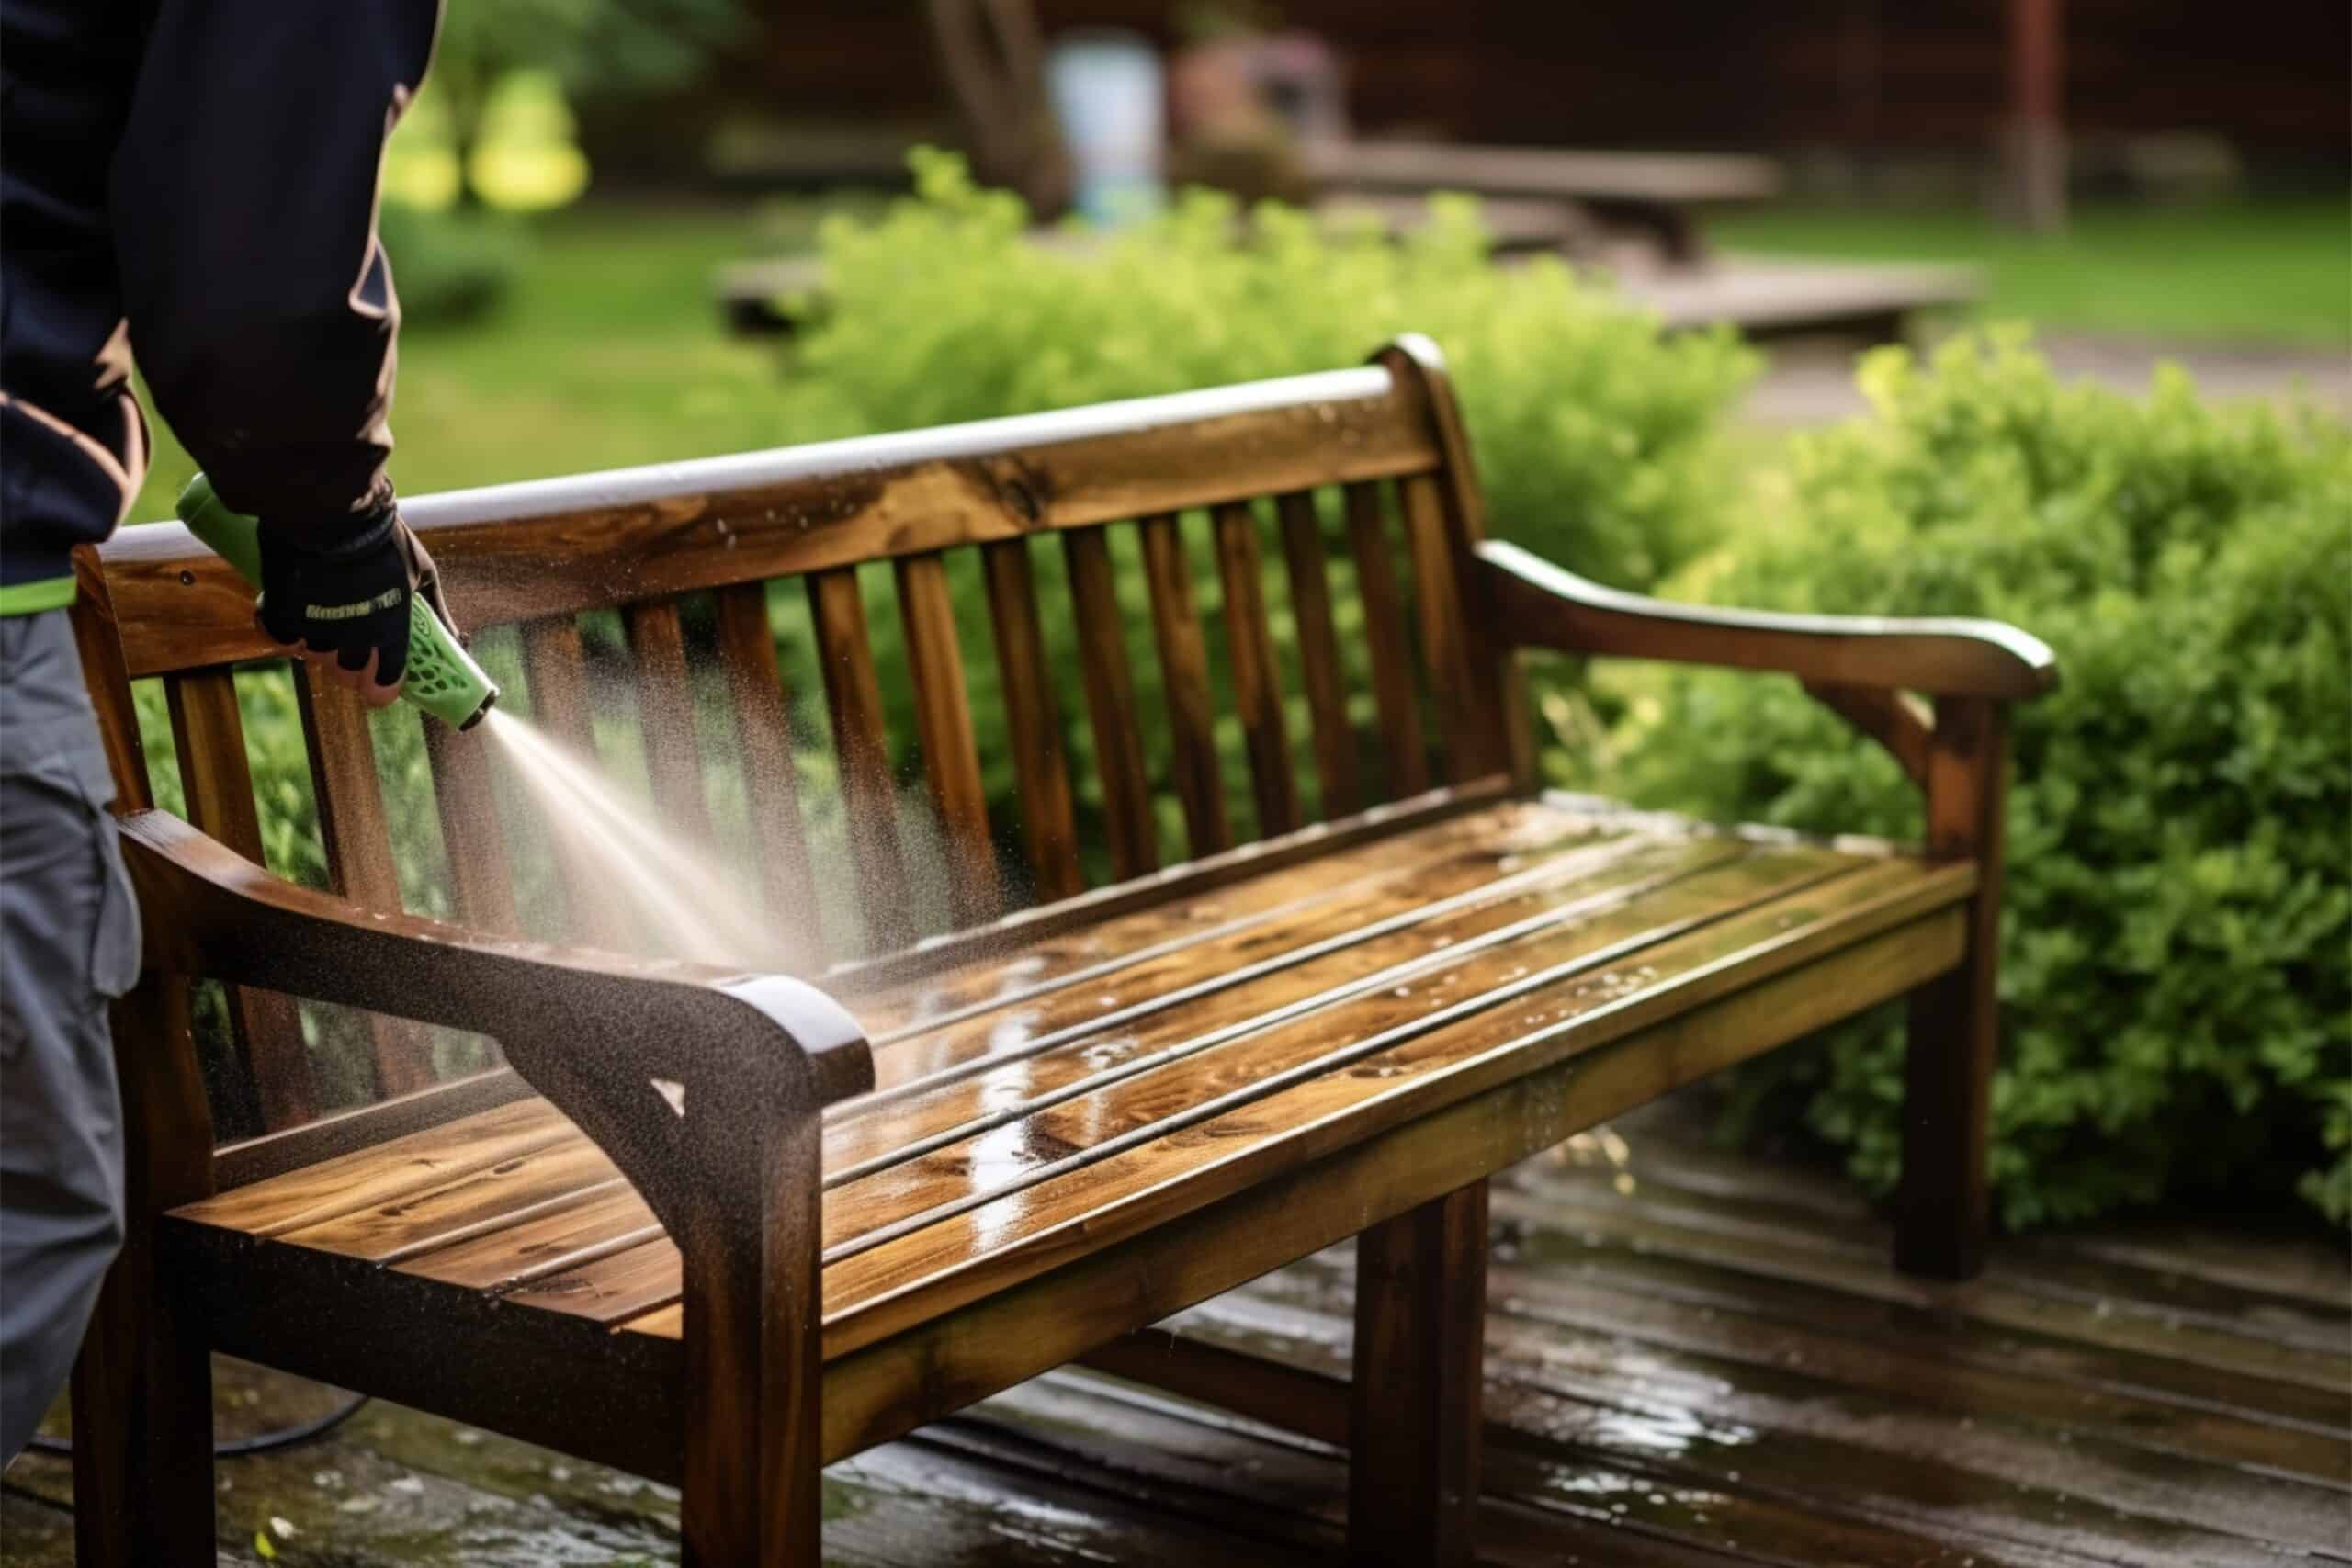 www.appr.com : Can I clean my deck or patio with an electric pressure washer?